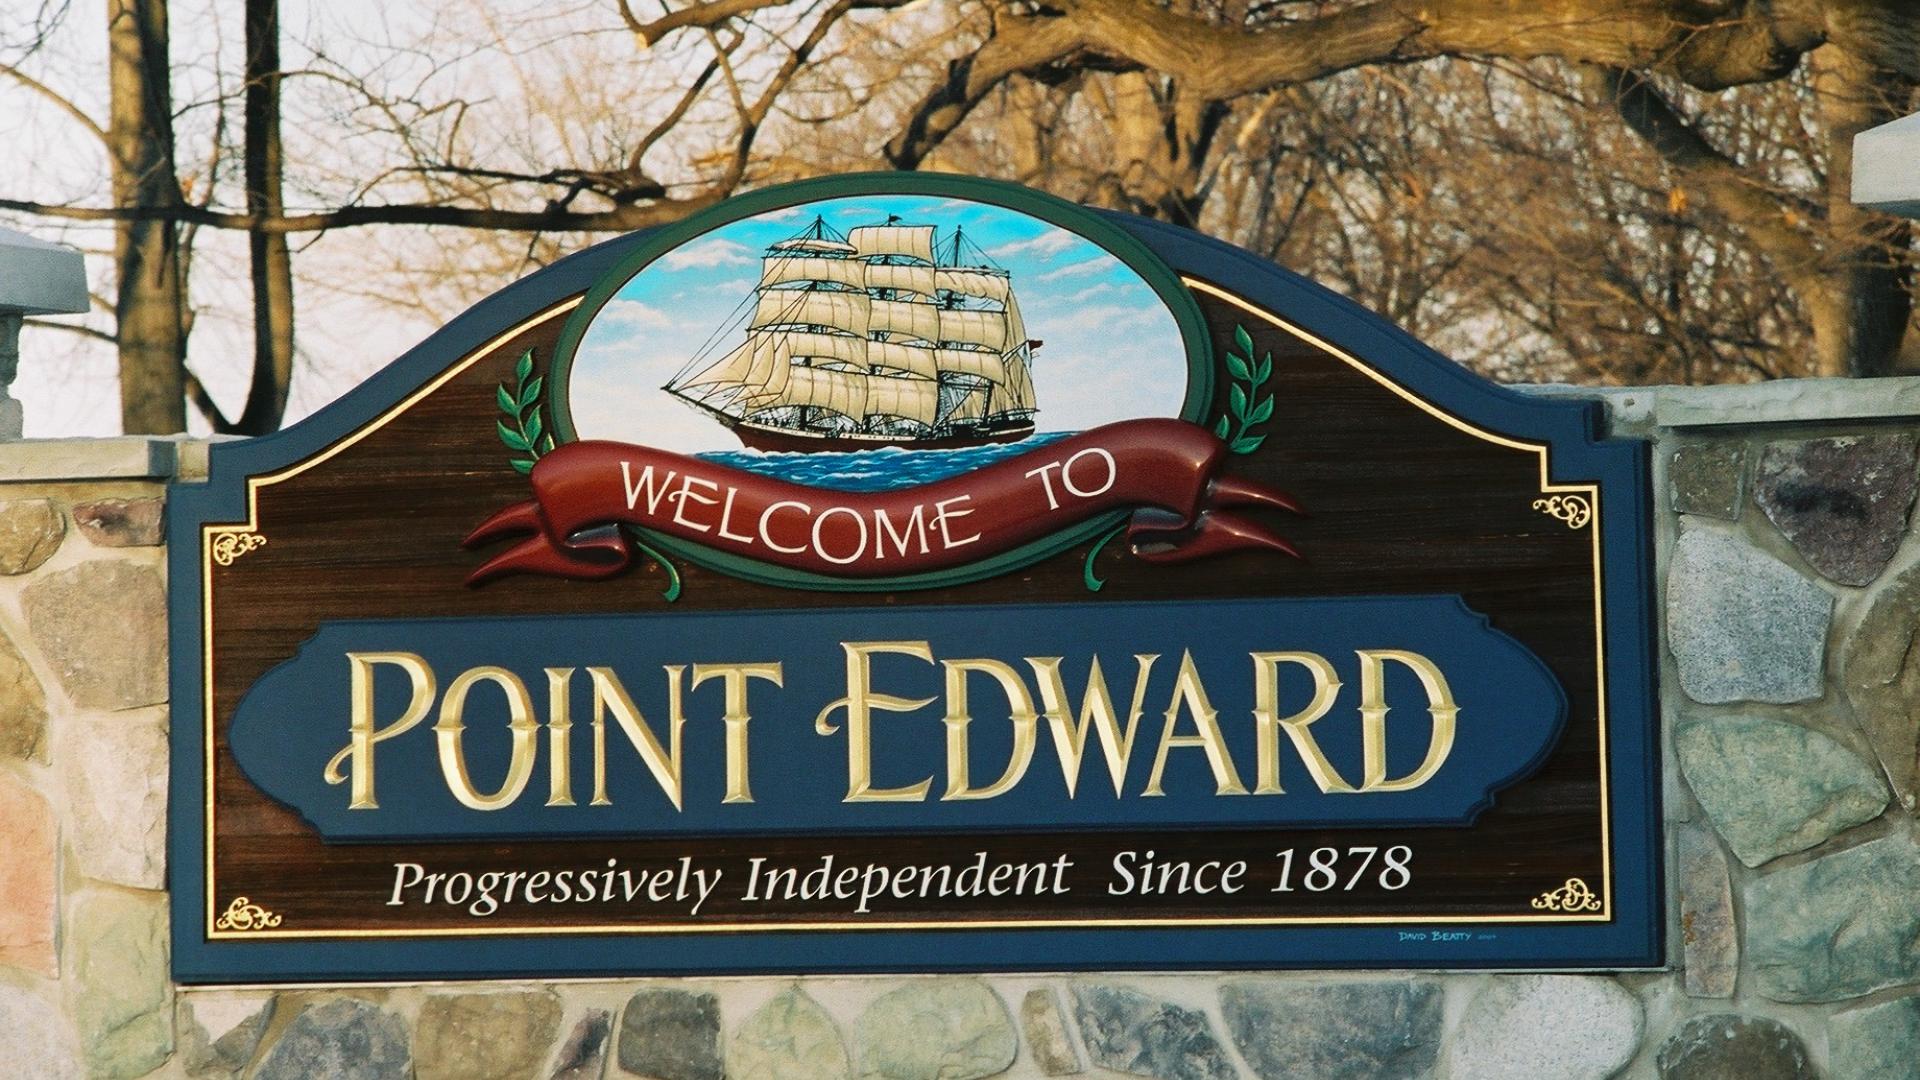 Point Edward welcome sign. The sign has a a large sailboat over the Point Edward wording.